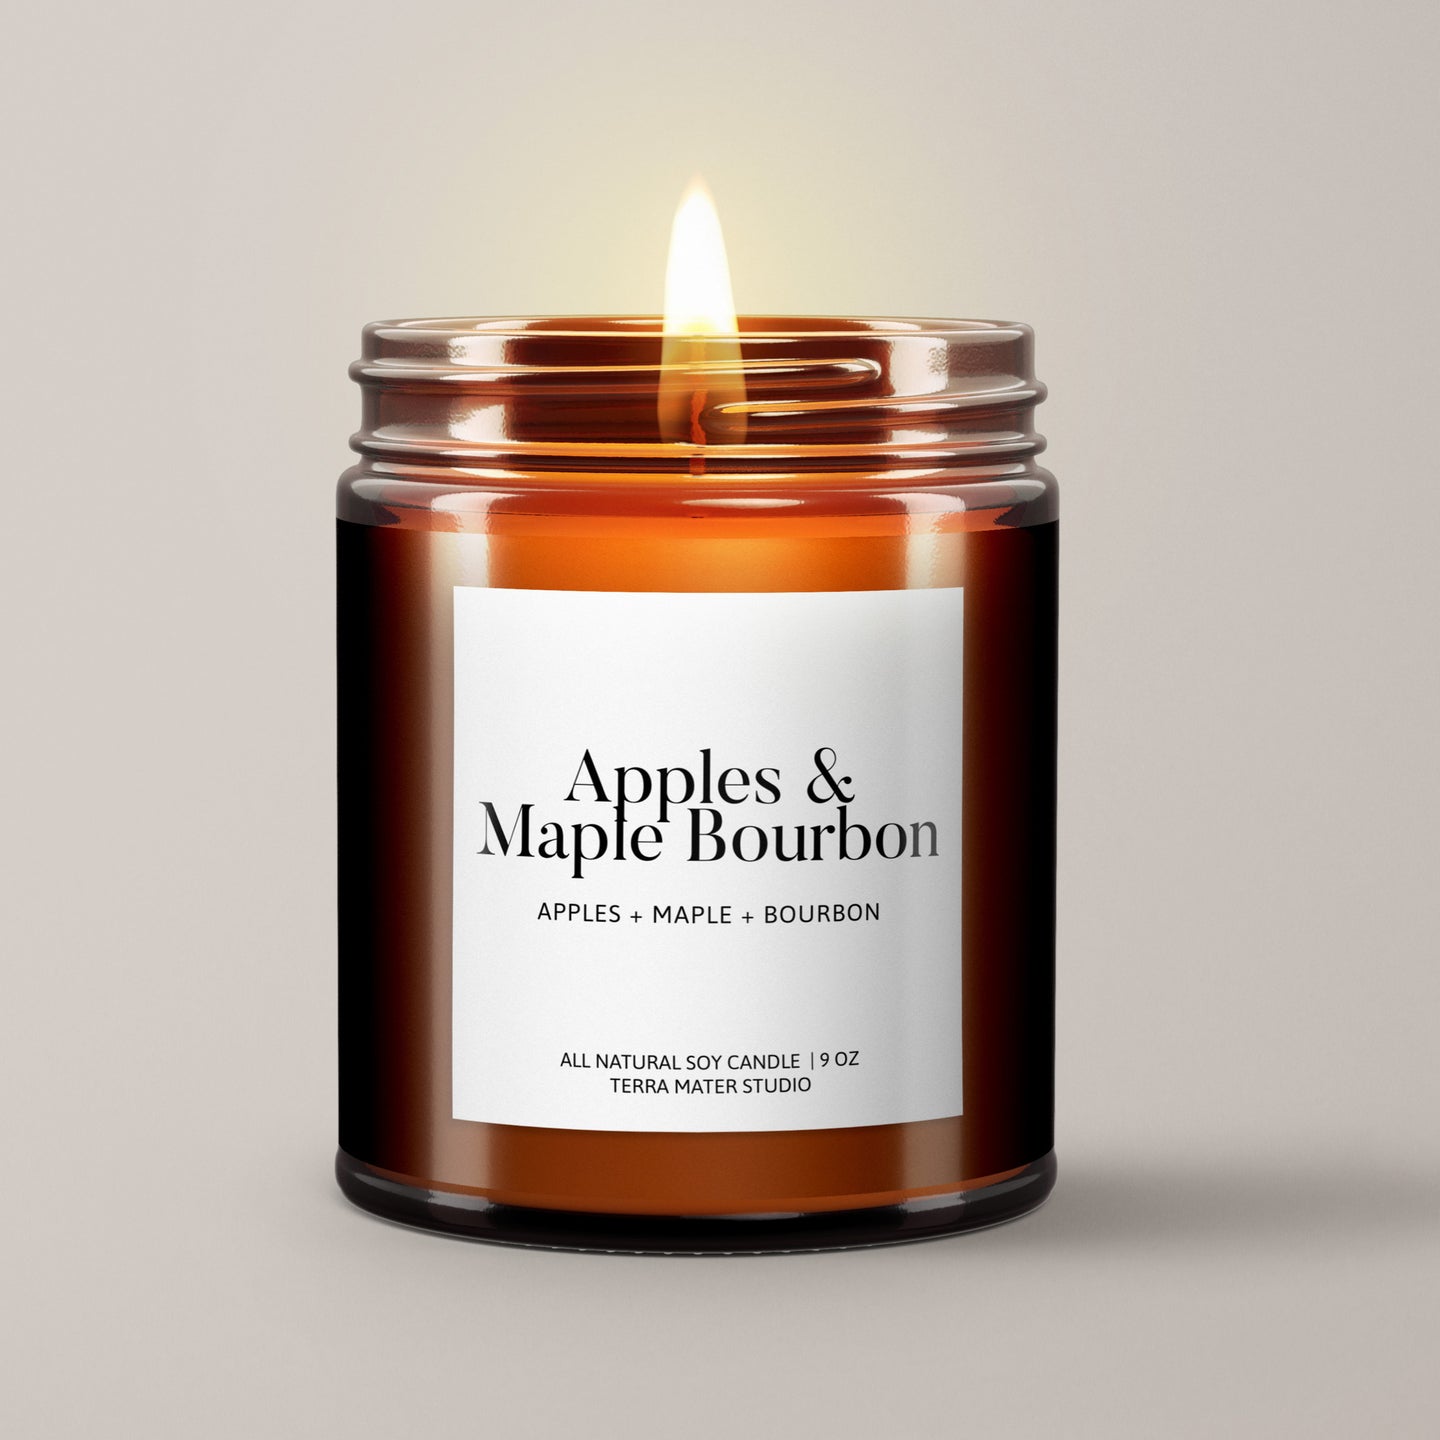 Apples + Maple Bourbon Soy Wax Candle